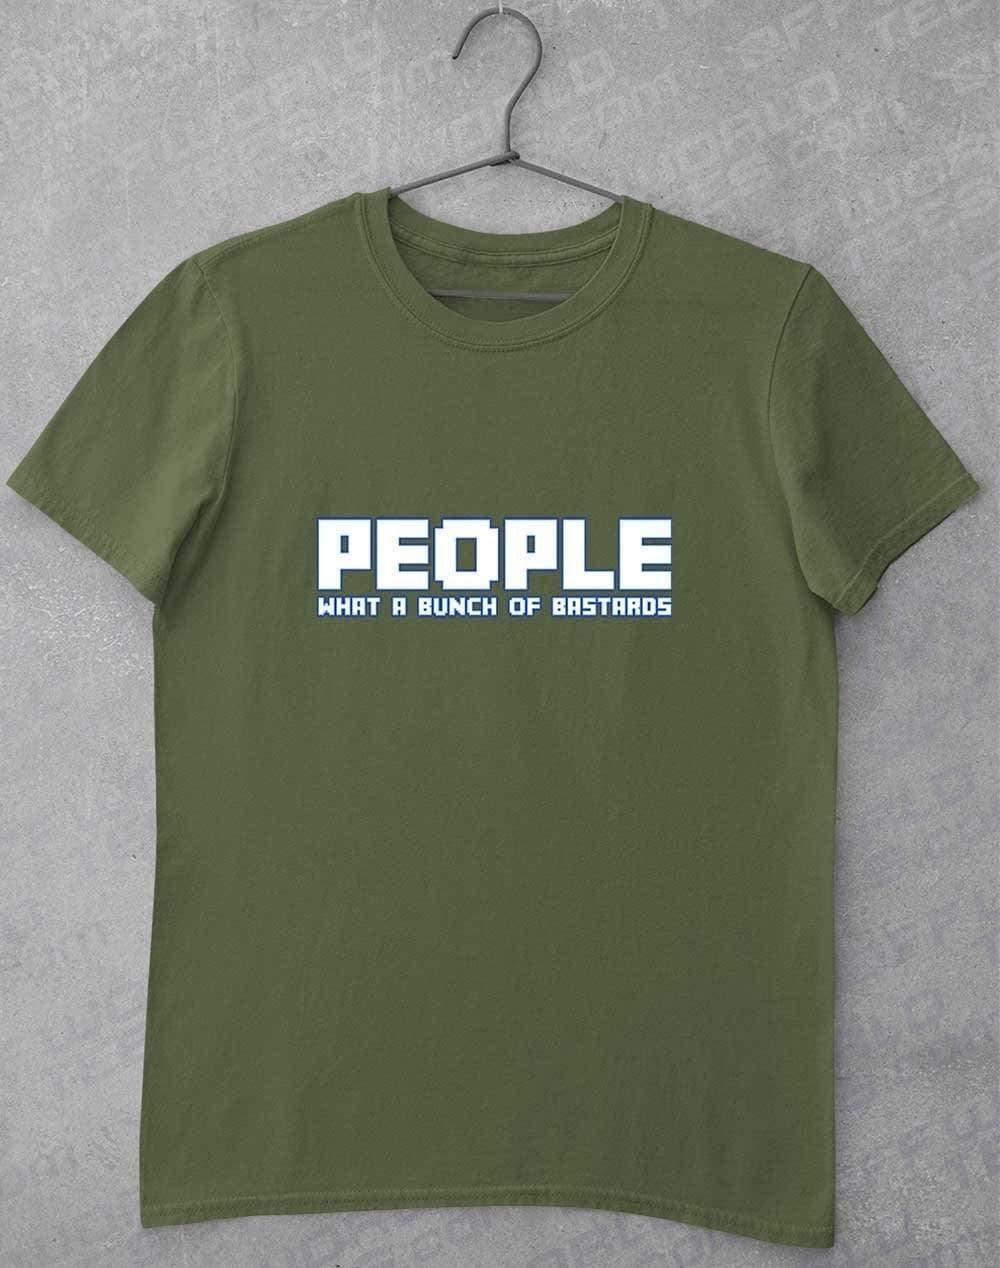 People = Bastards T-Shirt S / Military Green  - Off World Tees